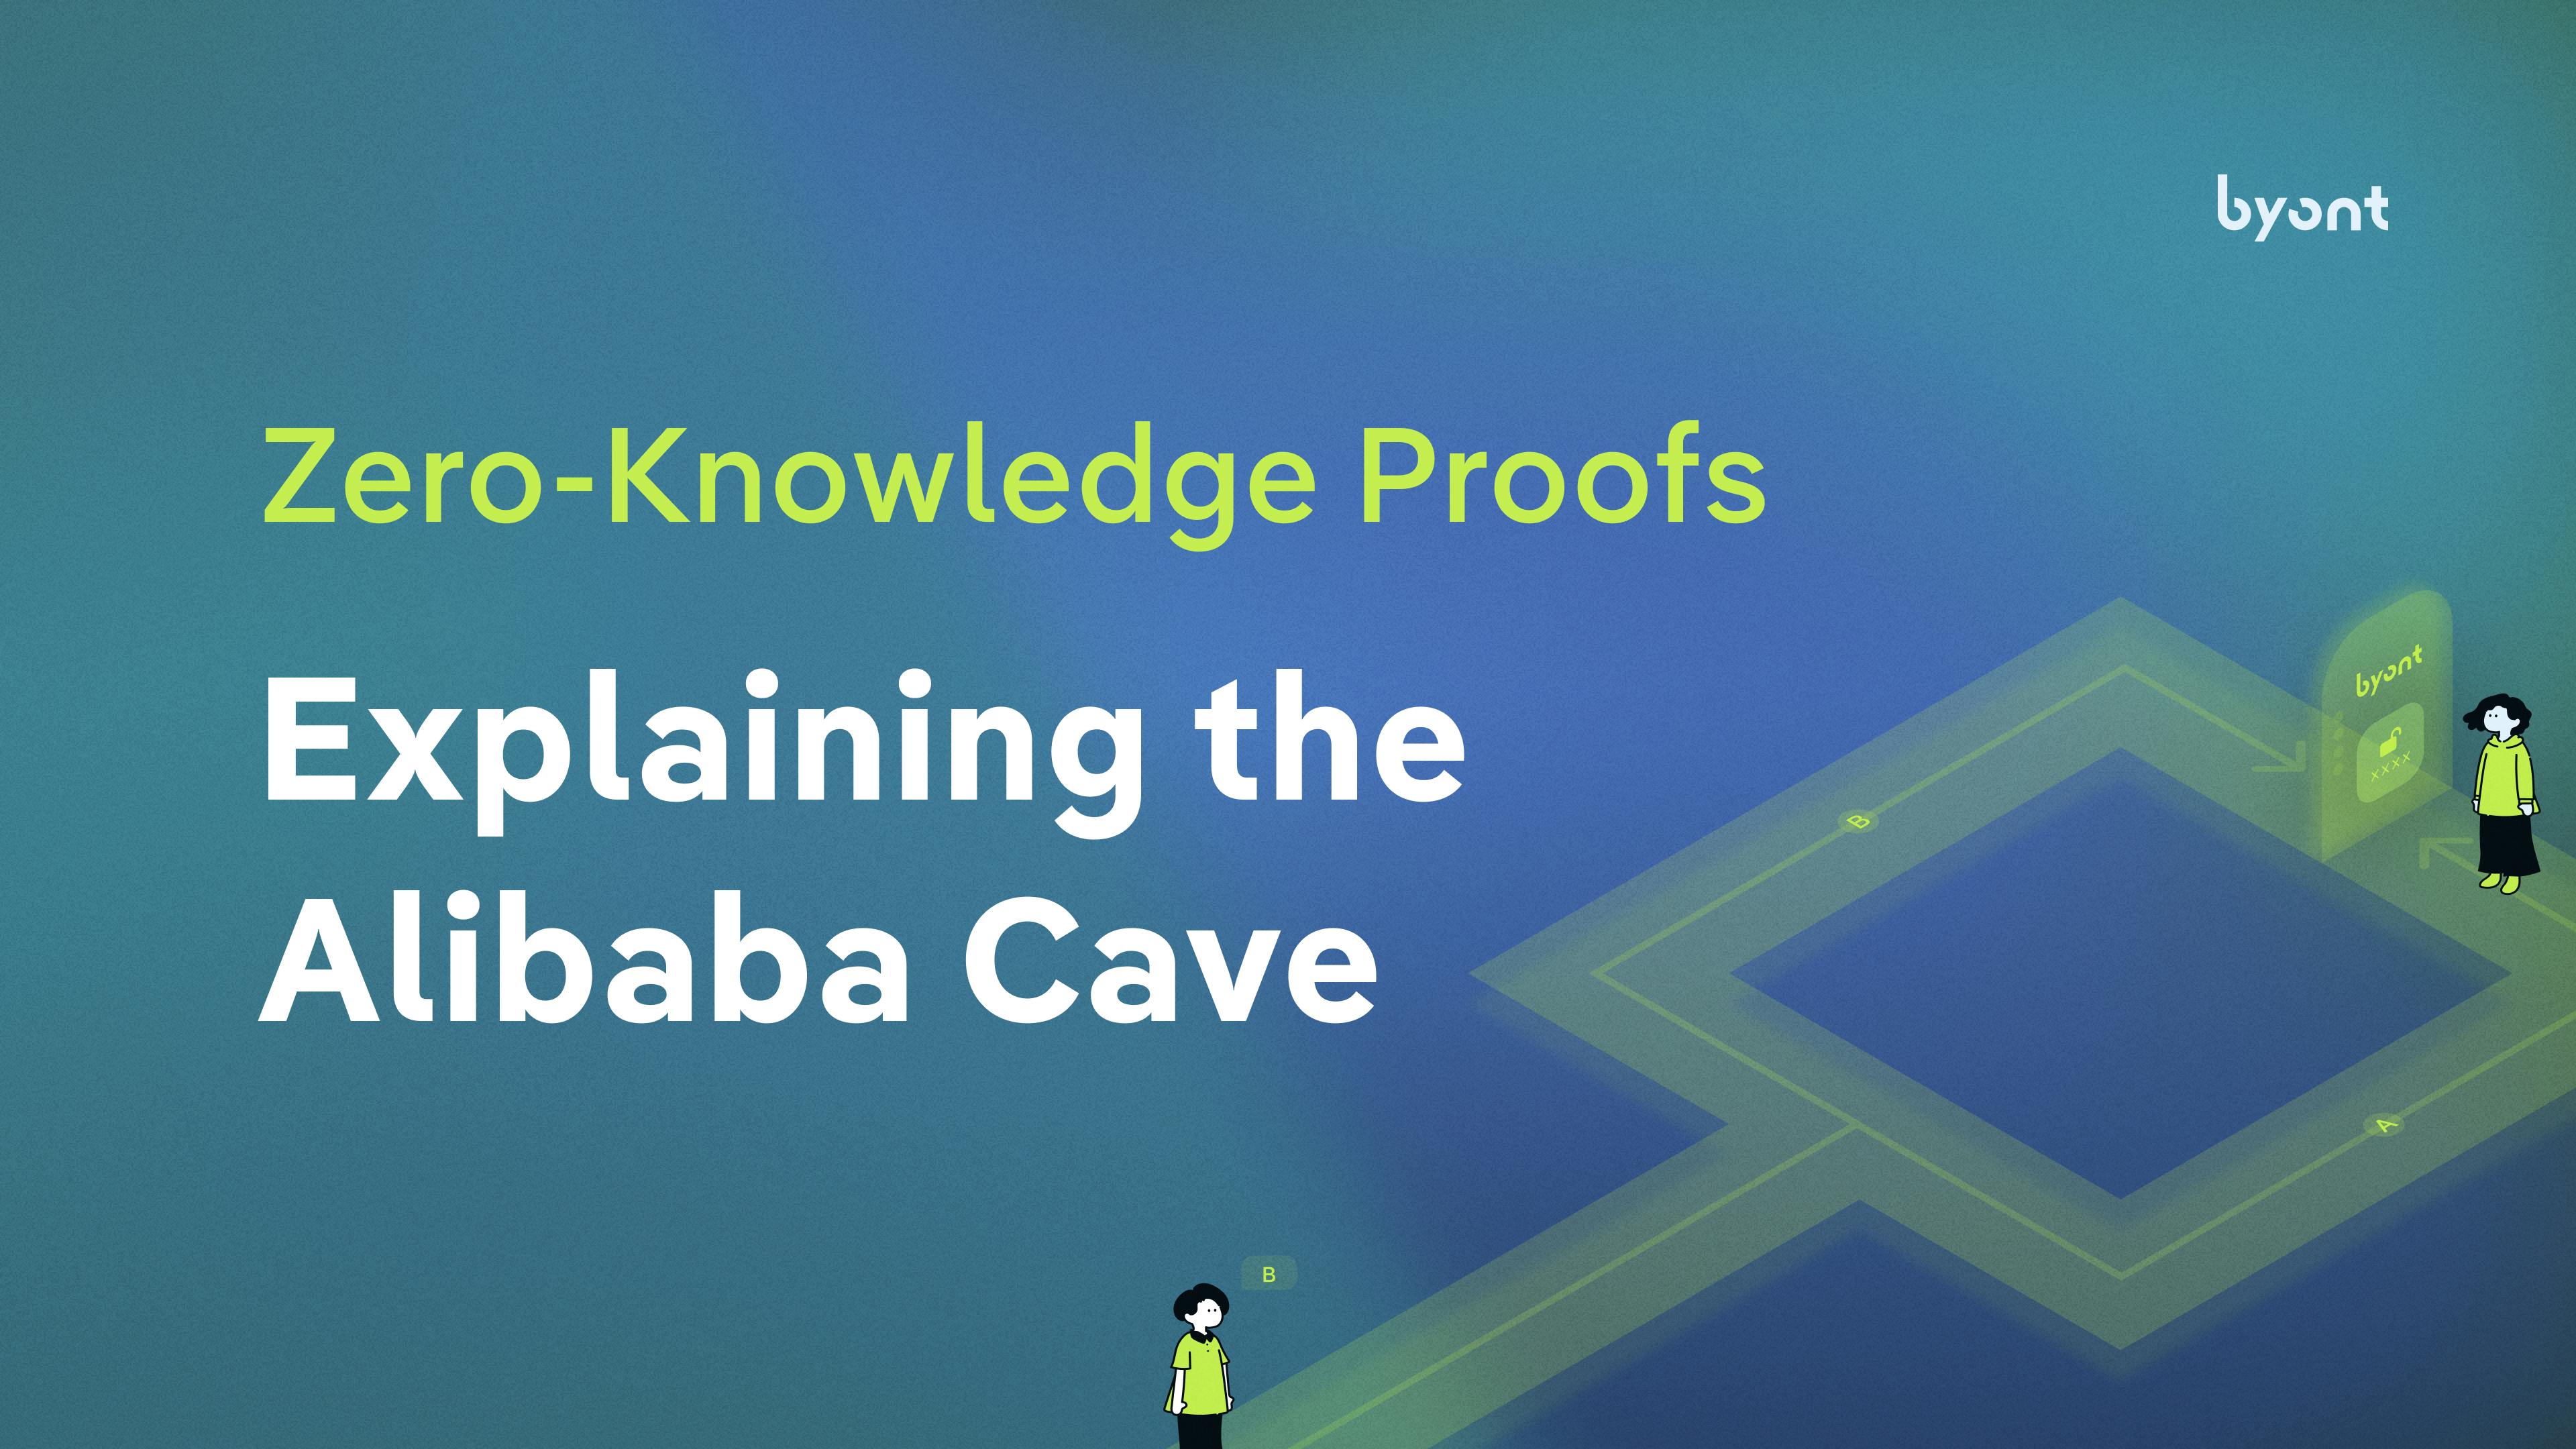 Zero Knowledge Proof - How it works and The Alibaba Cave Experiment